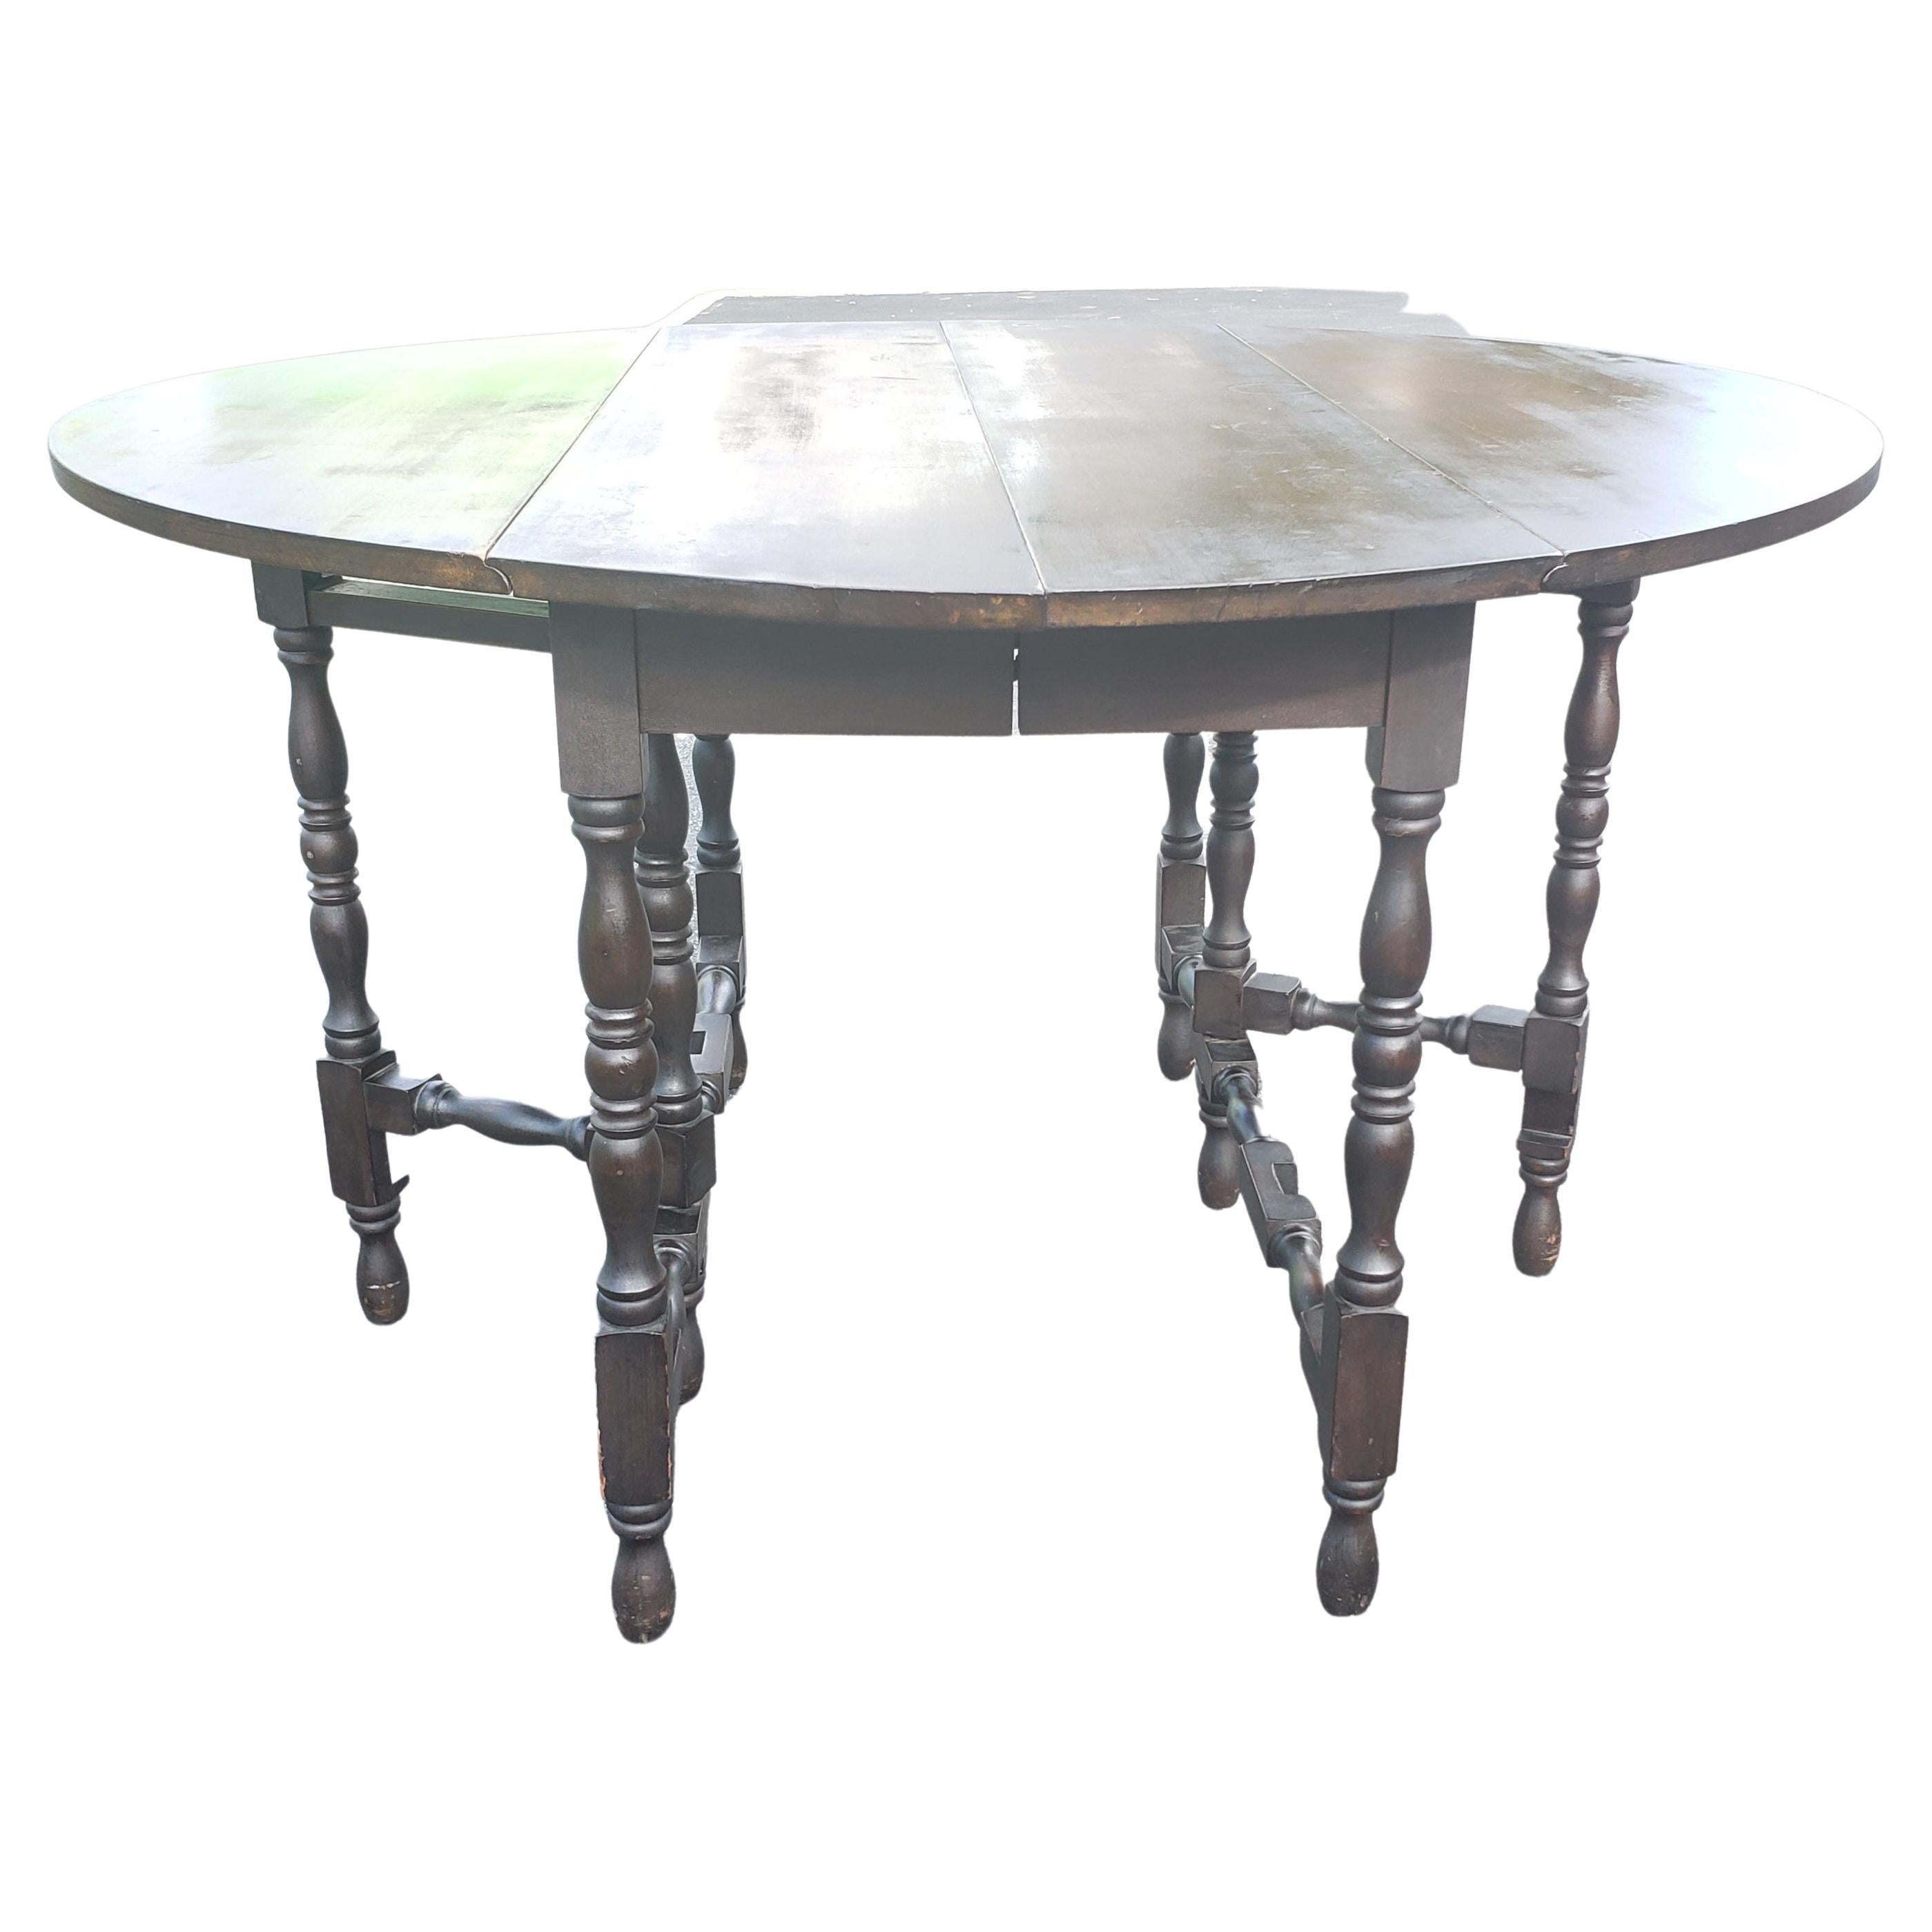 20th Century 1920s Imperial Gateleg Dining Table